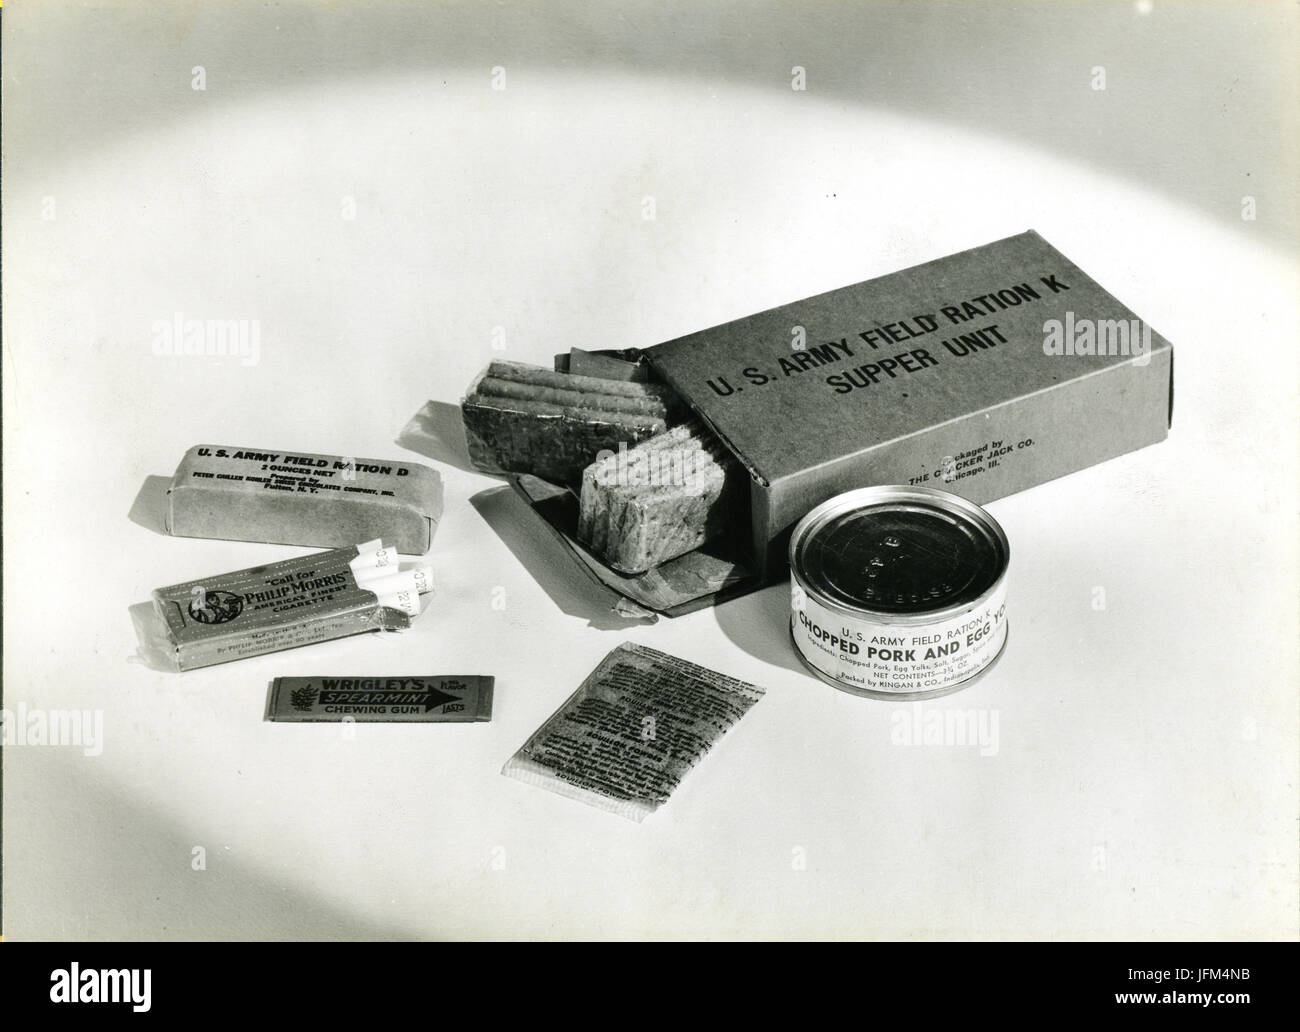 The contents of U.S. Army field ration K - supper unit. World War II-era. Stock Photo